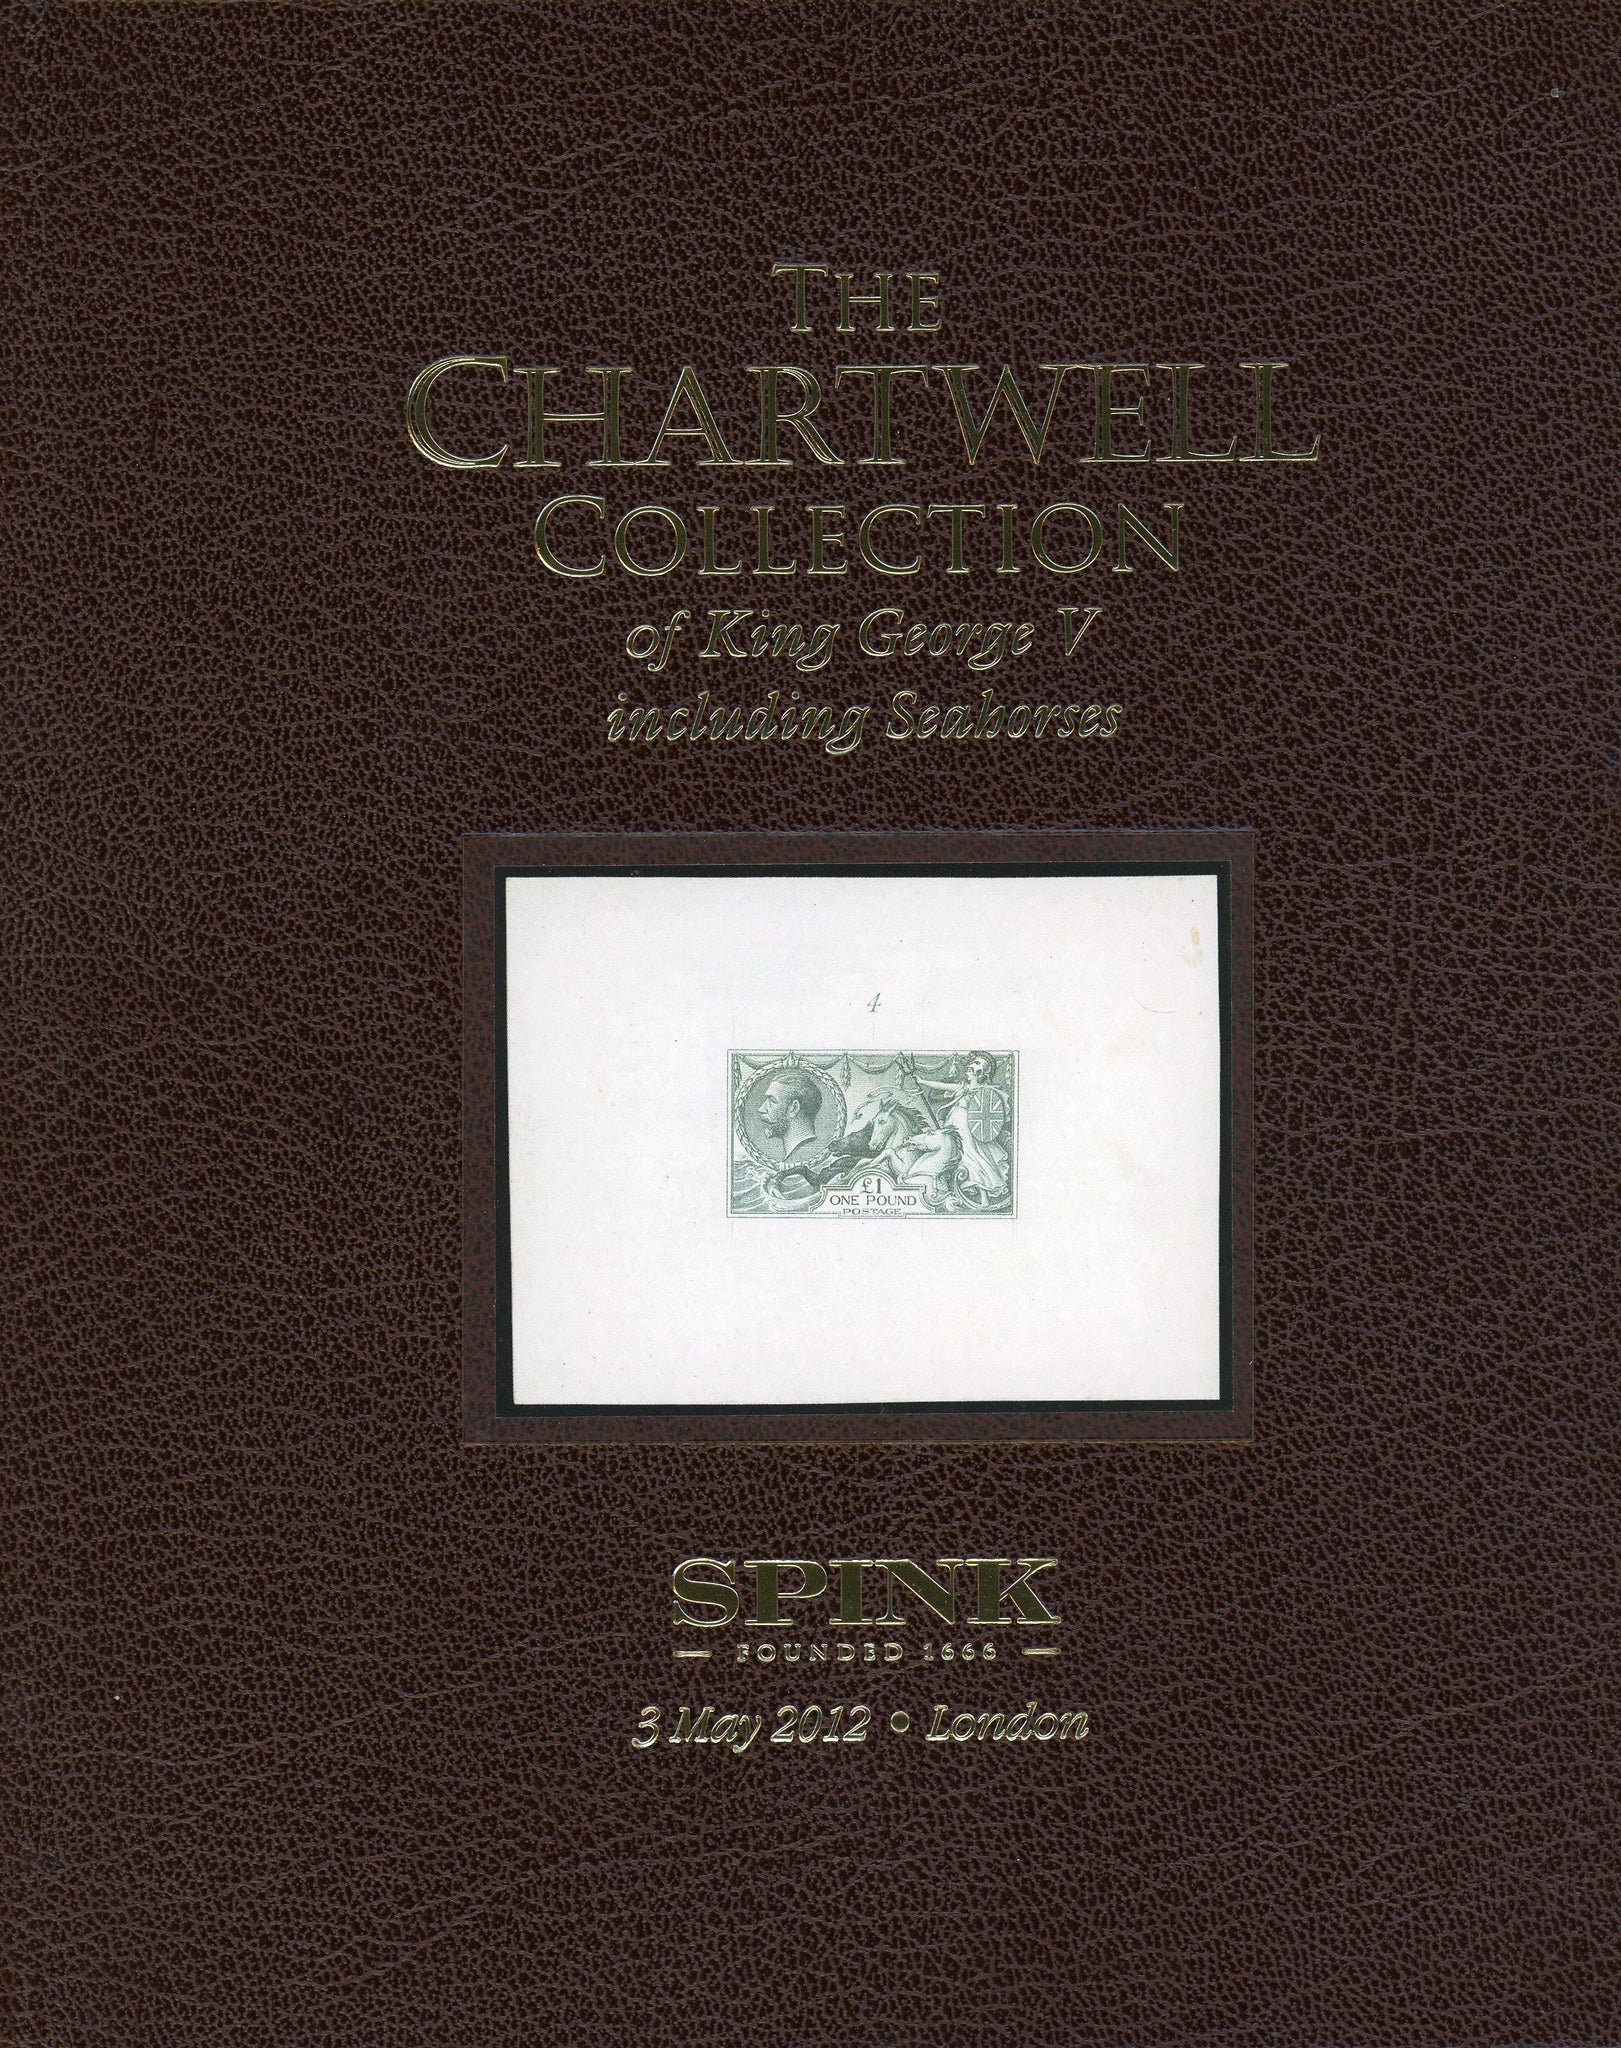 The Chartwell Collection of King George V and Seahorses Vol 6 - 3 May 2012 Spink London